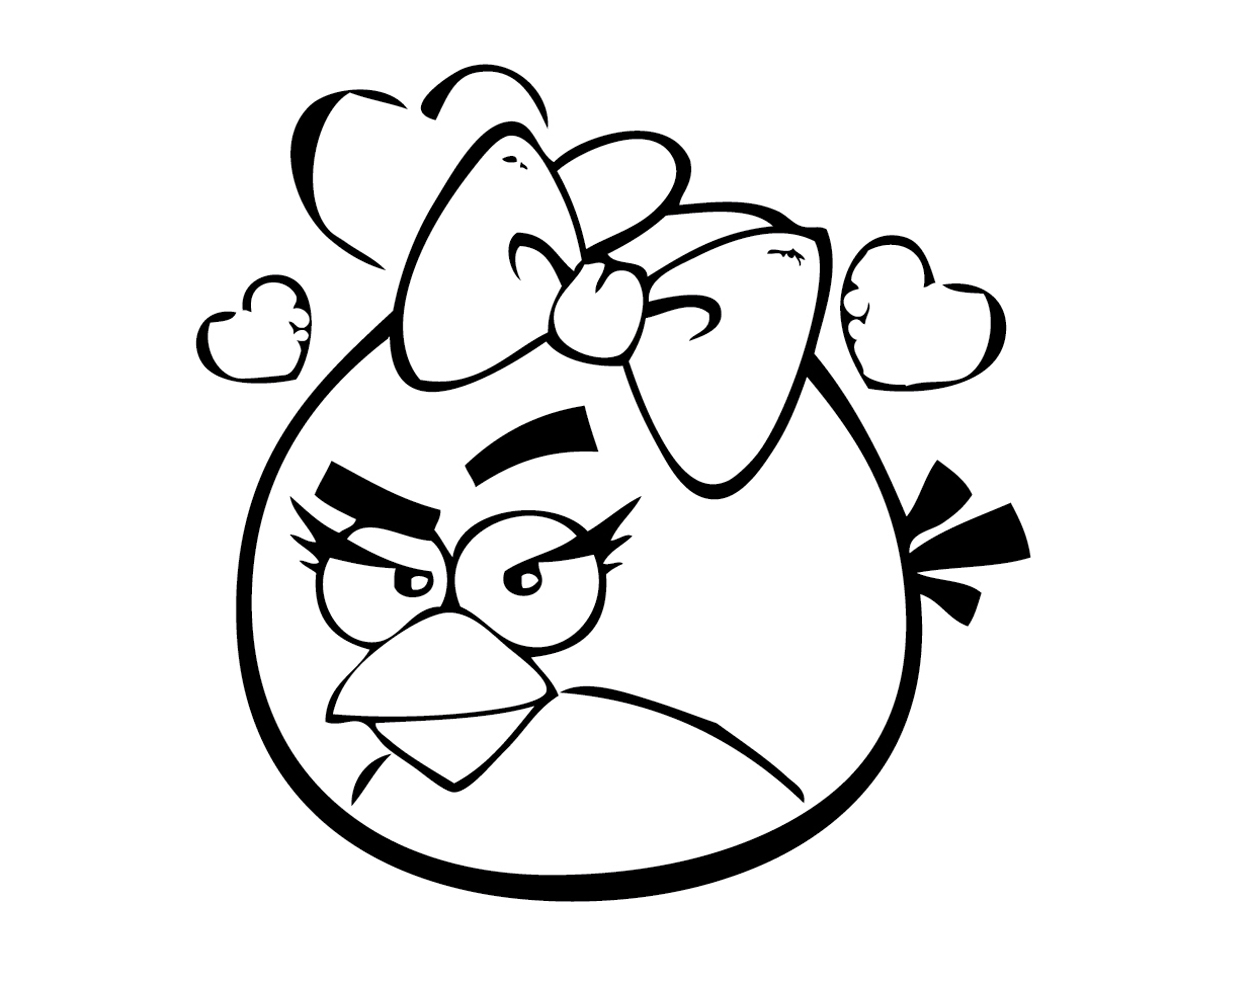 Image of several Angry Birds characters